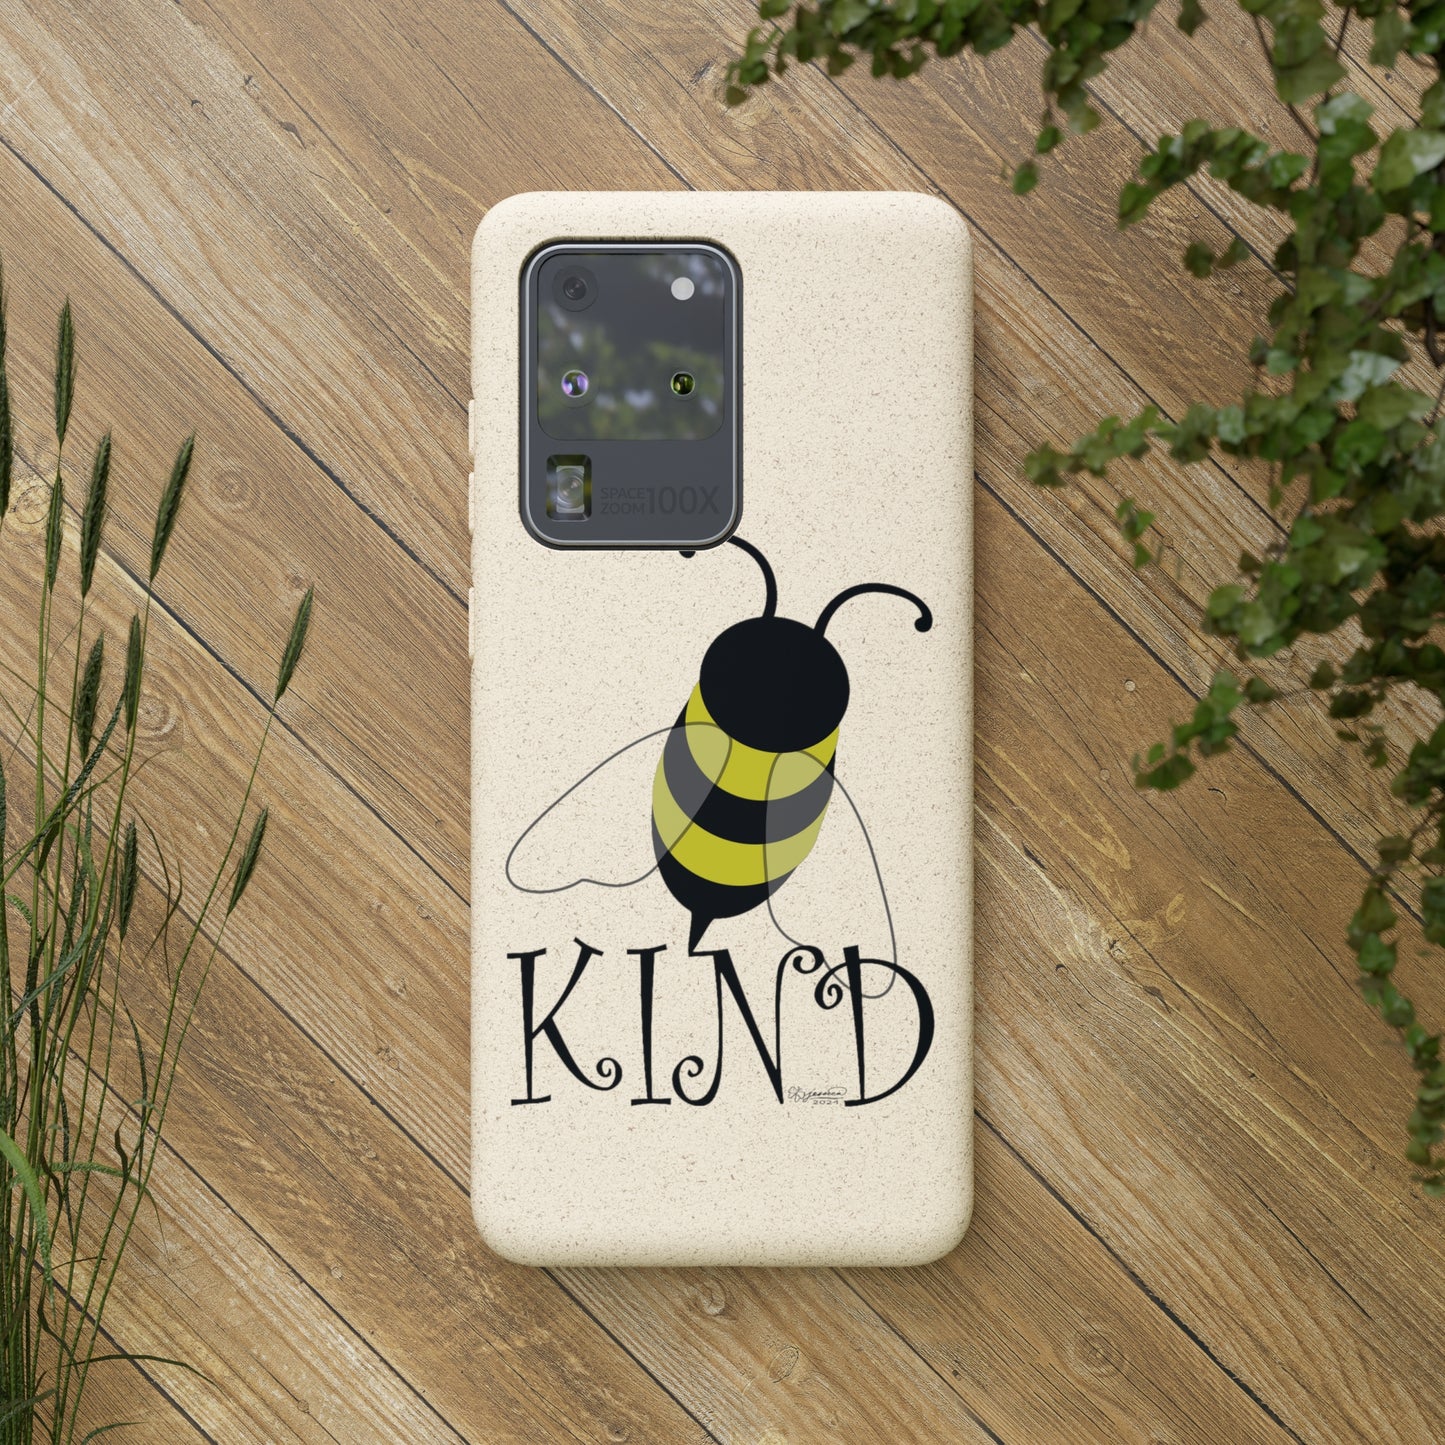 Bee Kind: The Eco-Friendly Phone Case That Supports the Environment and the Pollinators